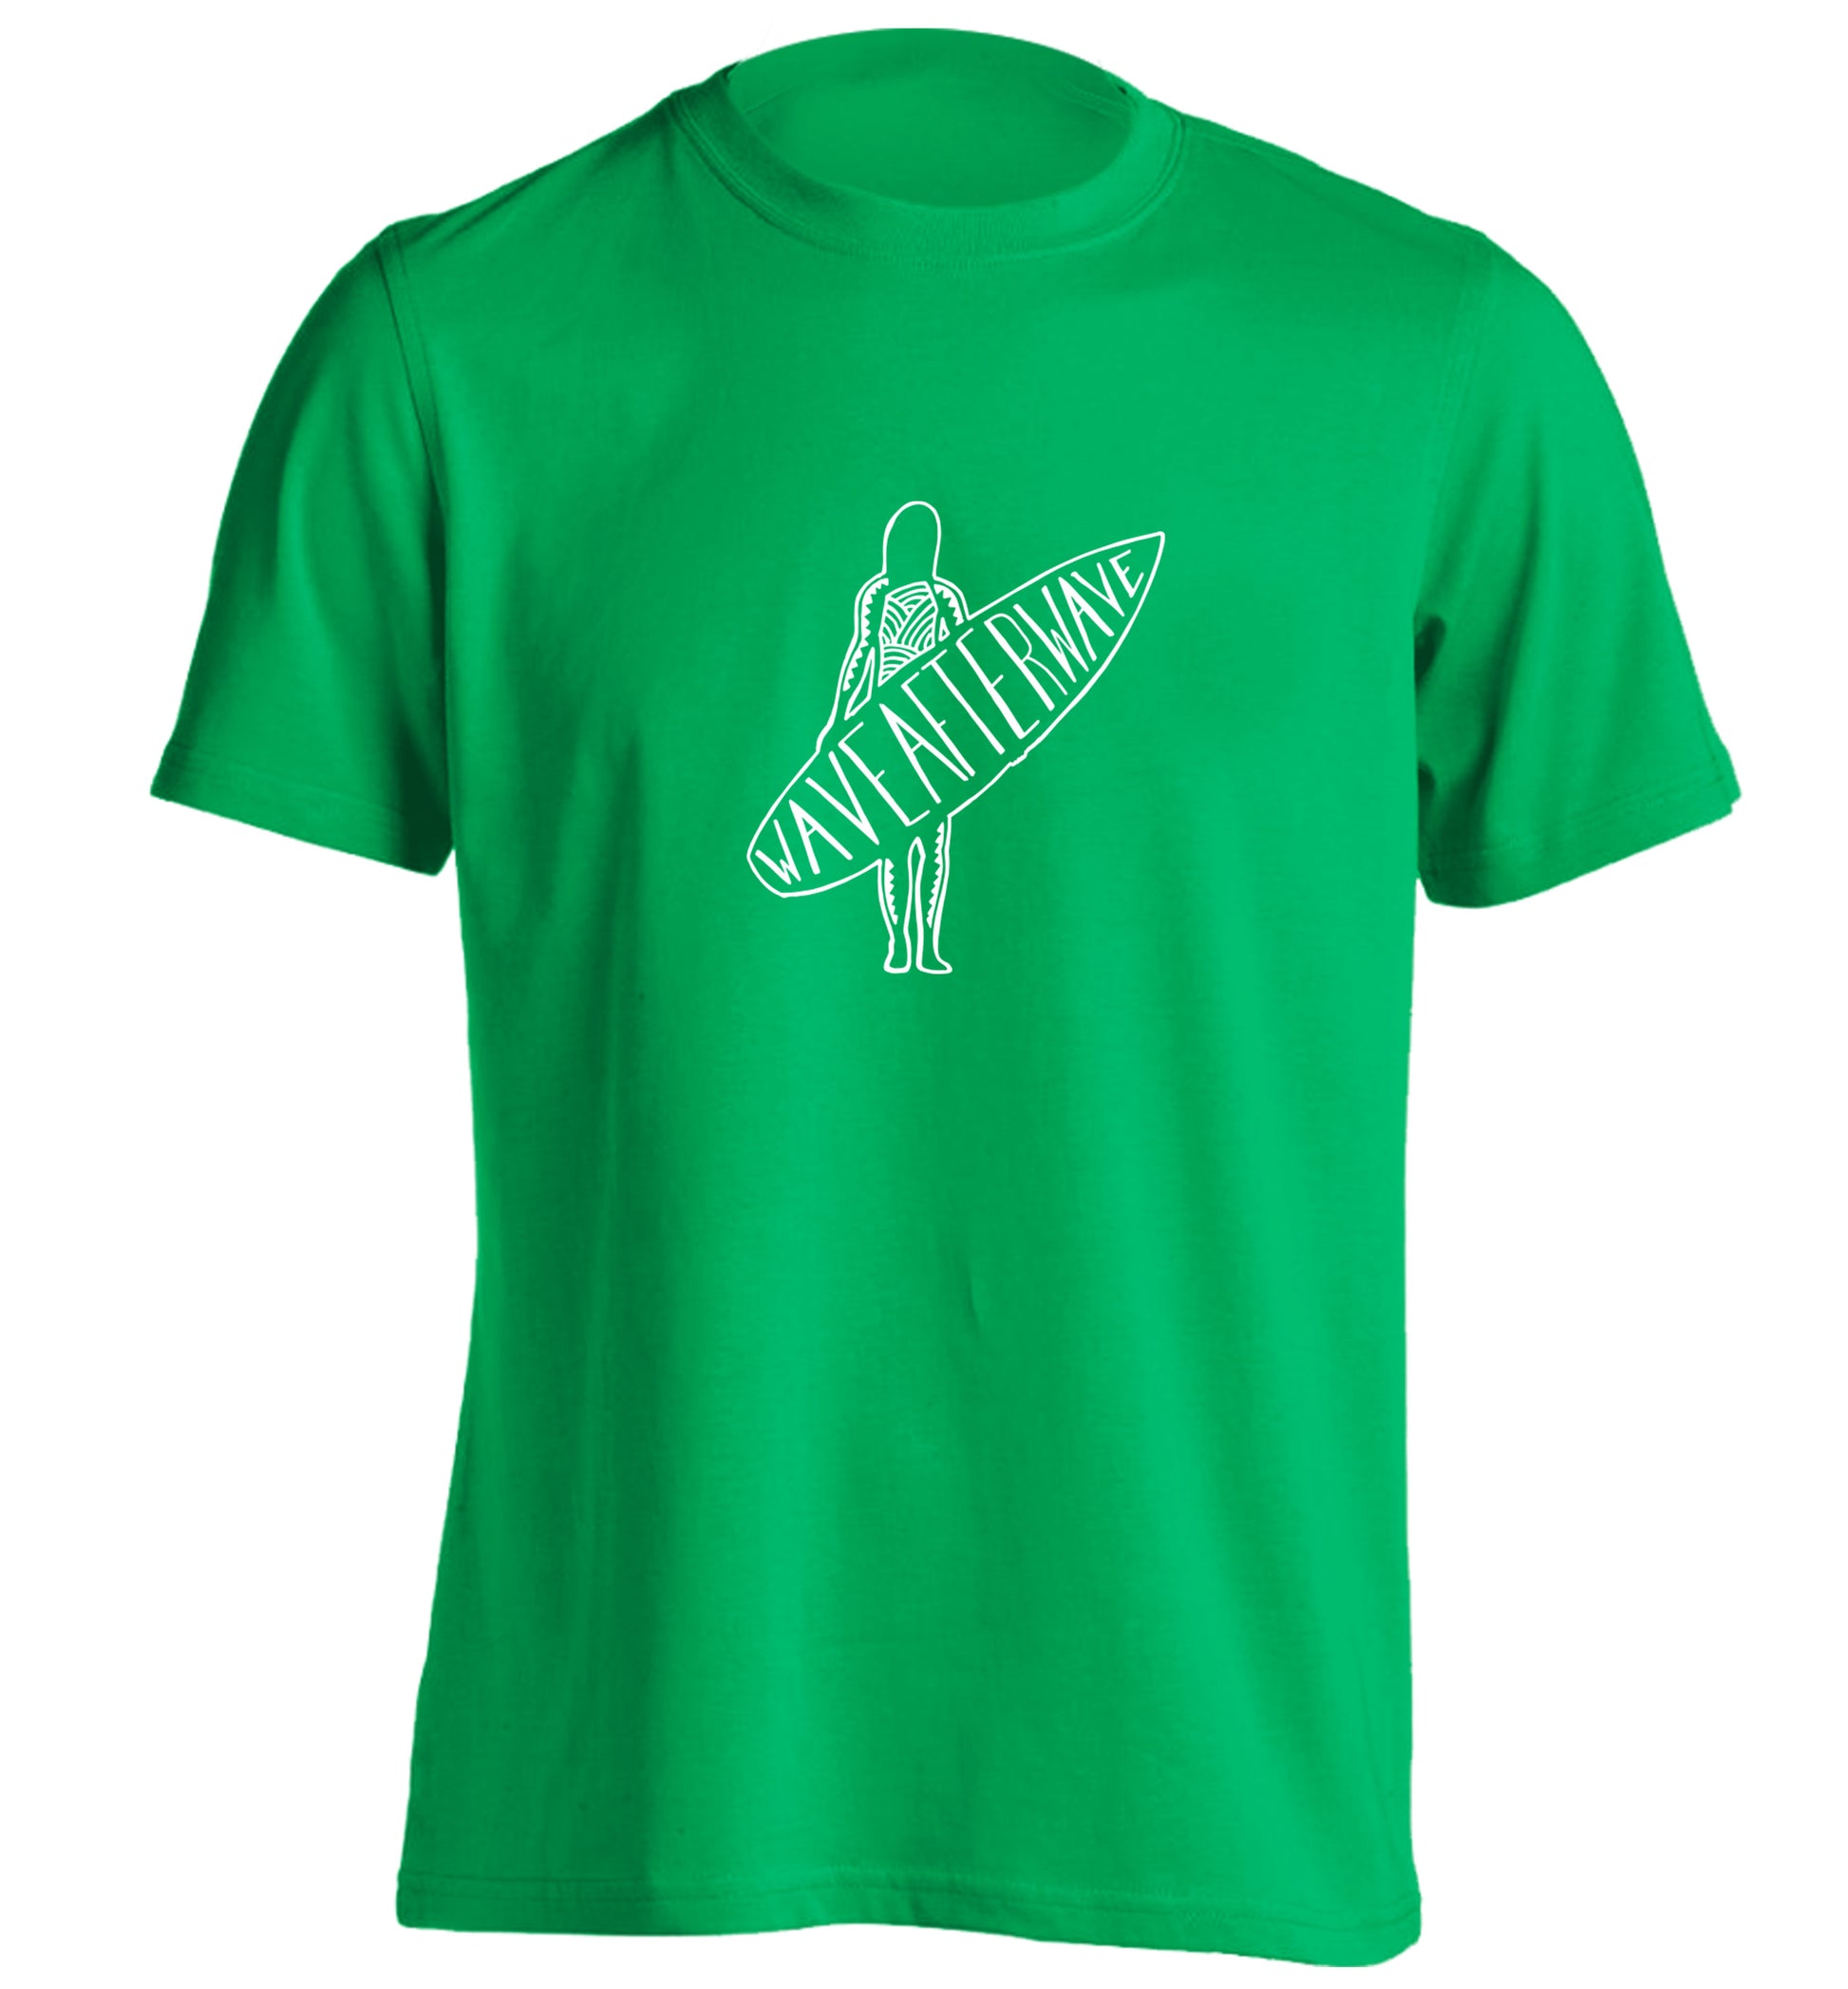 Wave after wave adults unisex green Tshirt 2XL